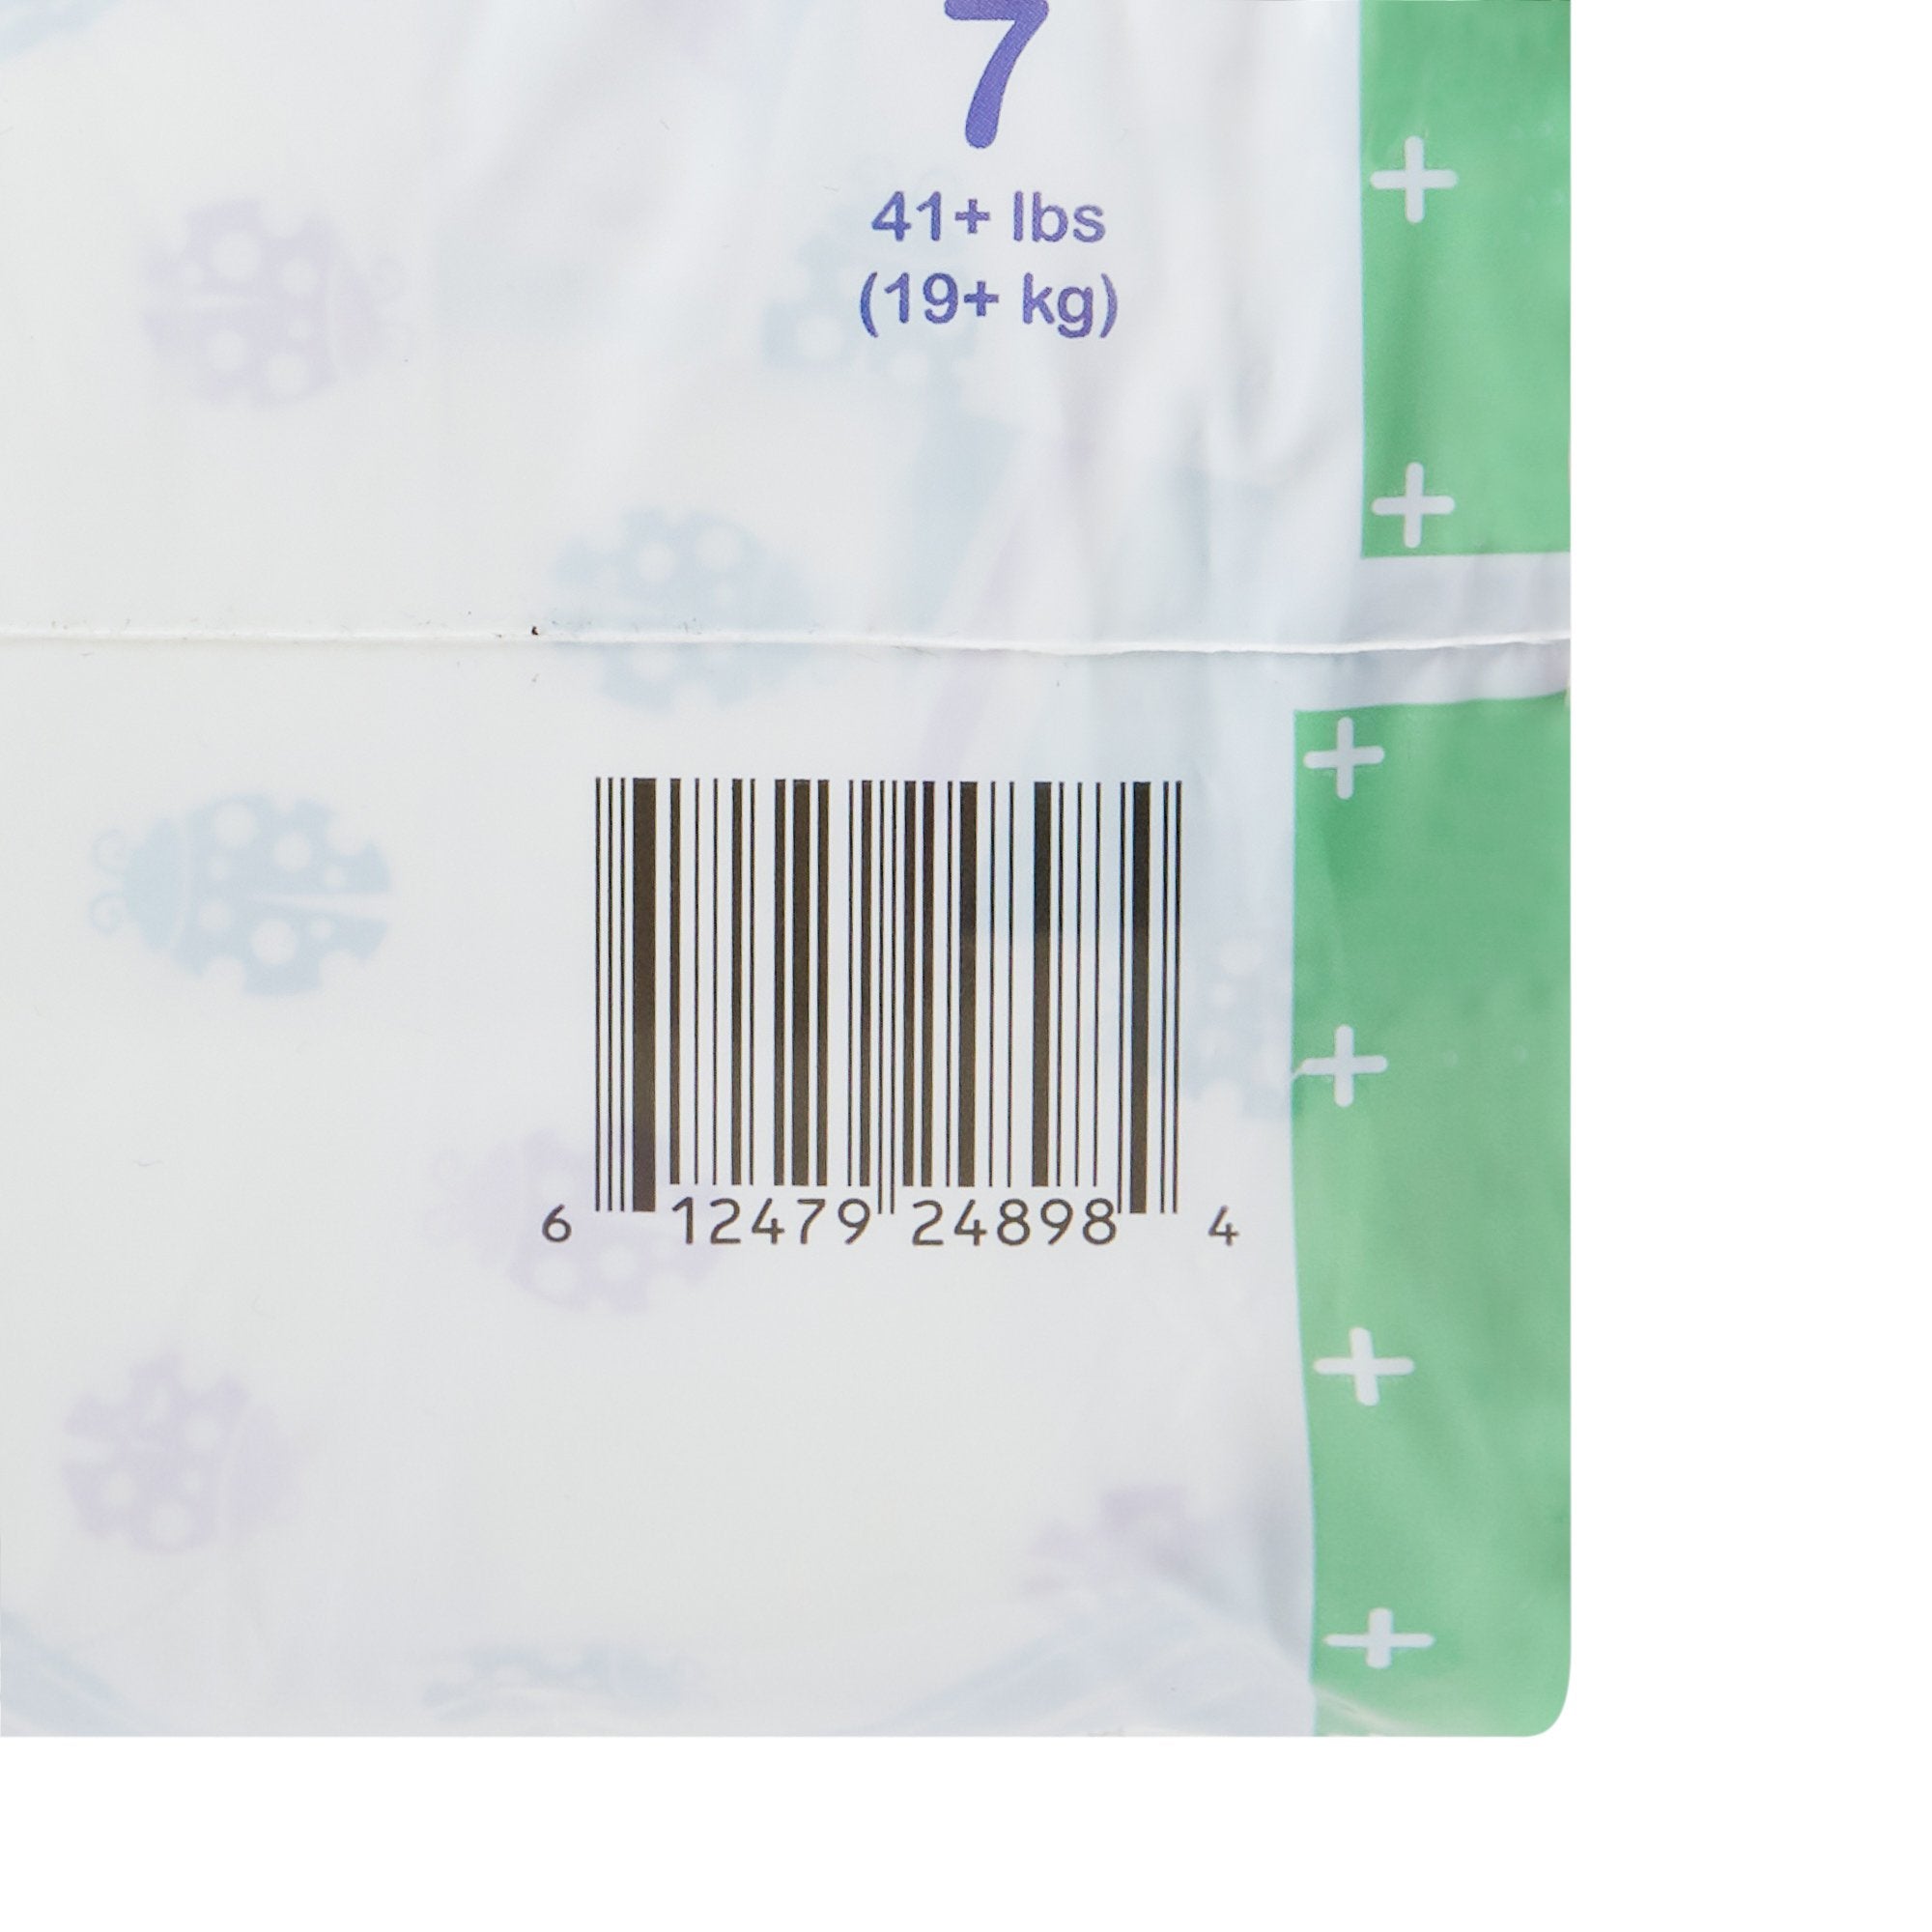 Unisex Baby Diaper McKesson Size 7 Disposable Moderate Absorbency